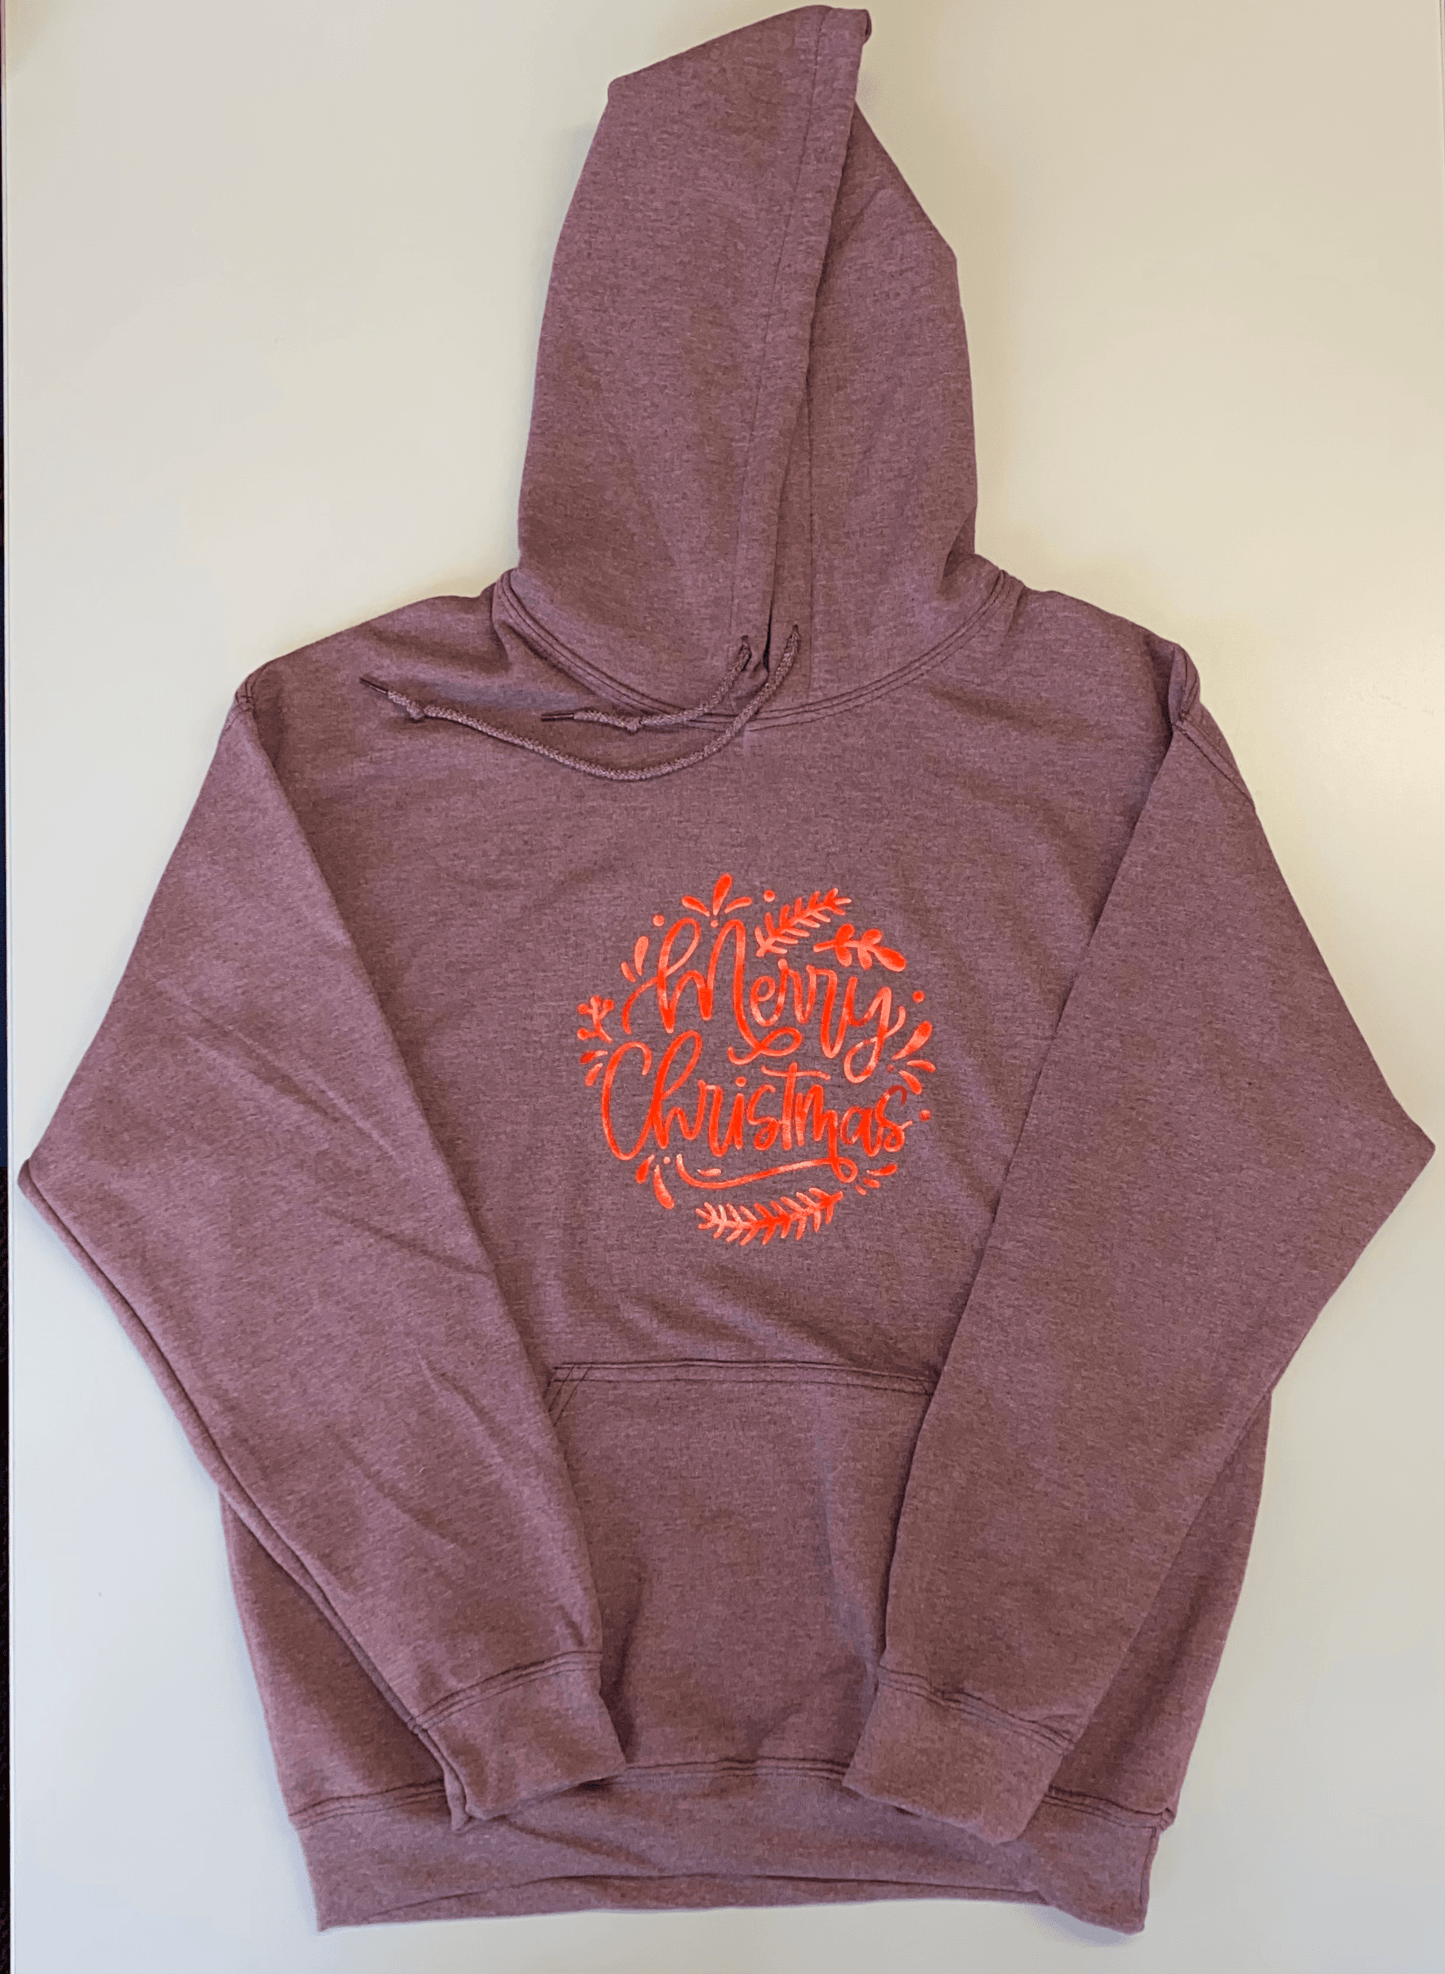 Merry Christmas Hoodie for Holidays. Graphic Hoodies for Family.